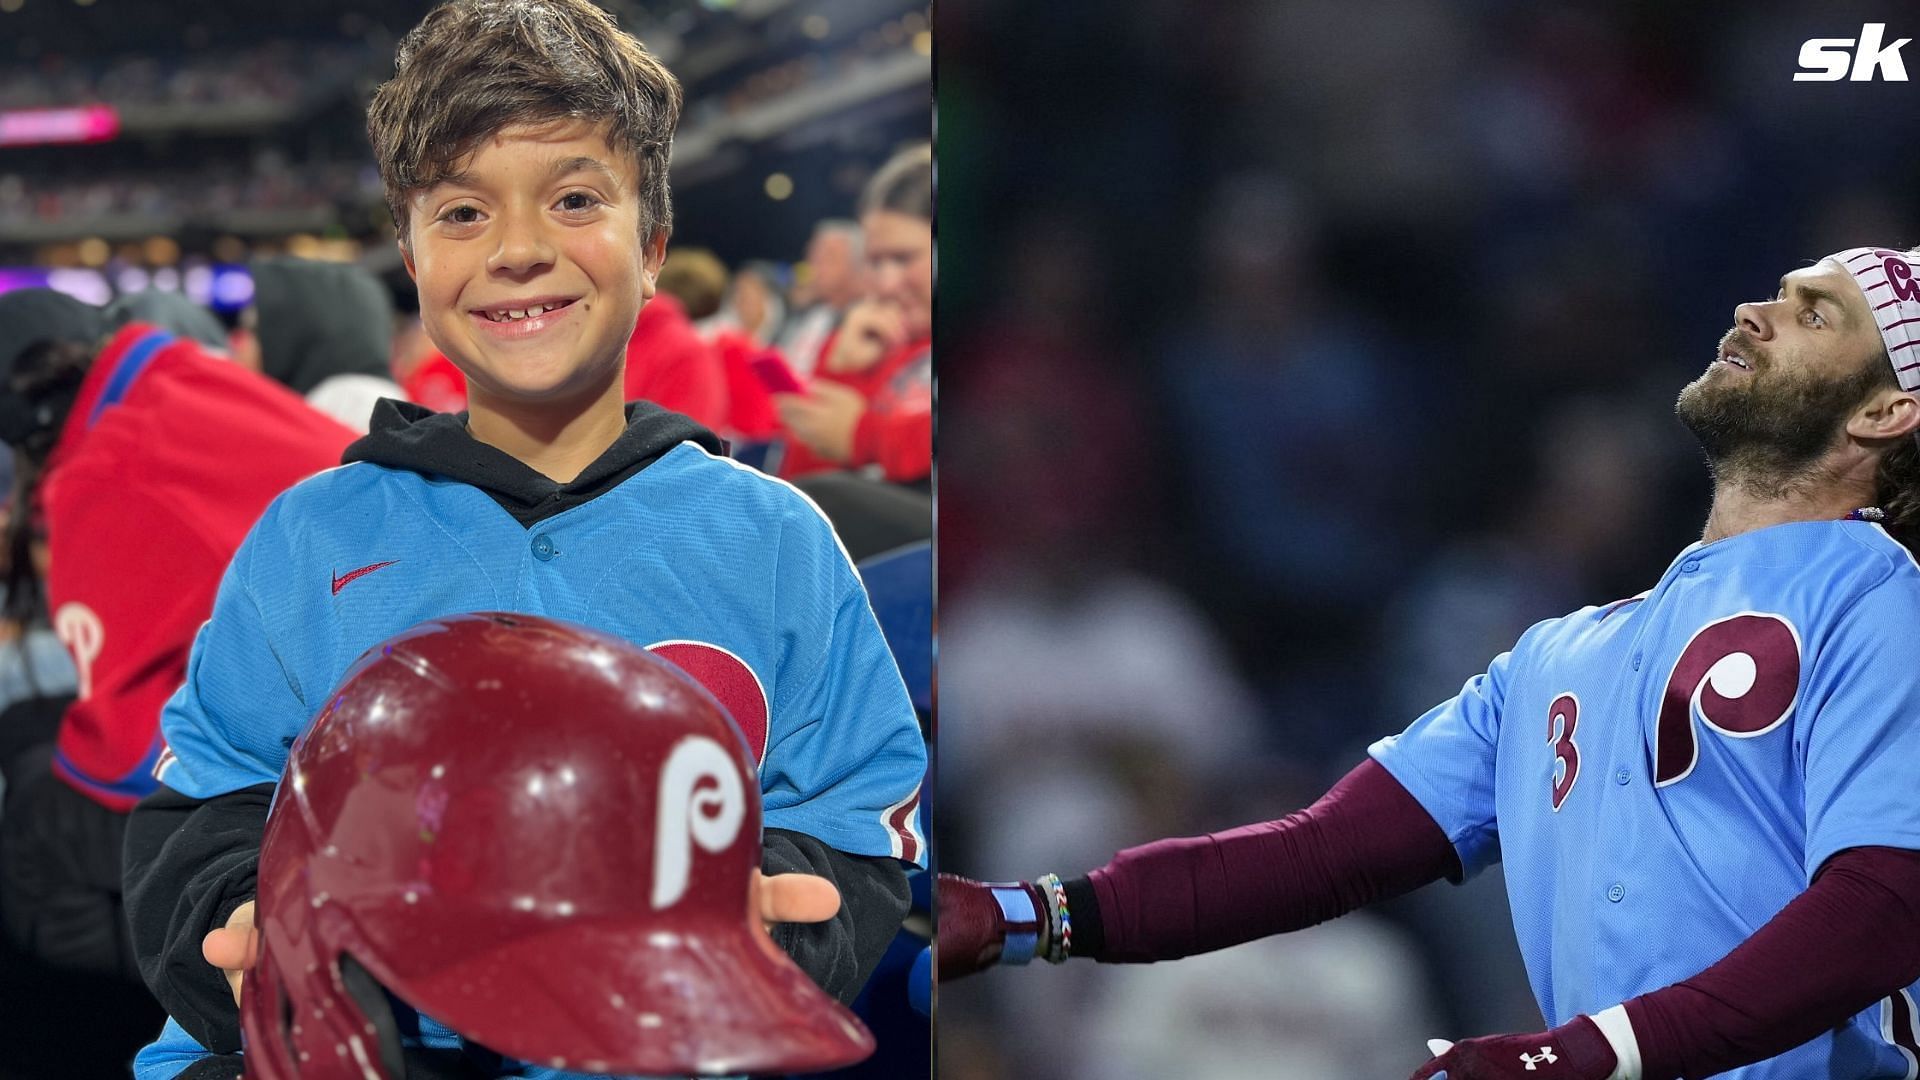 Instagram explodes with excitement as 10-year-old Hayden Dorfman gets Bryce Harper's helmet after ejection: "So happy a kid got this"